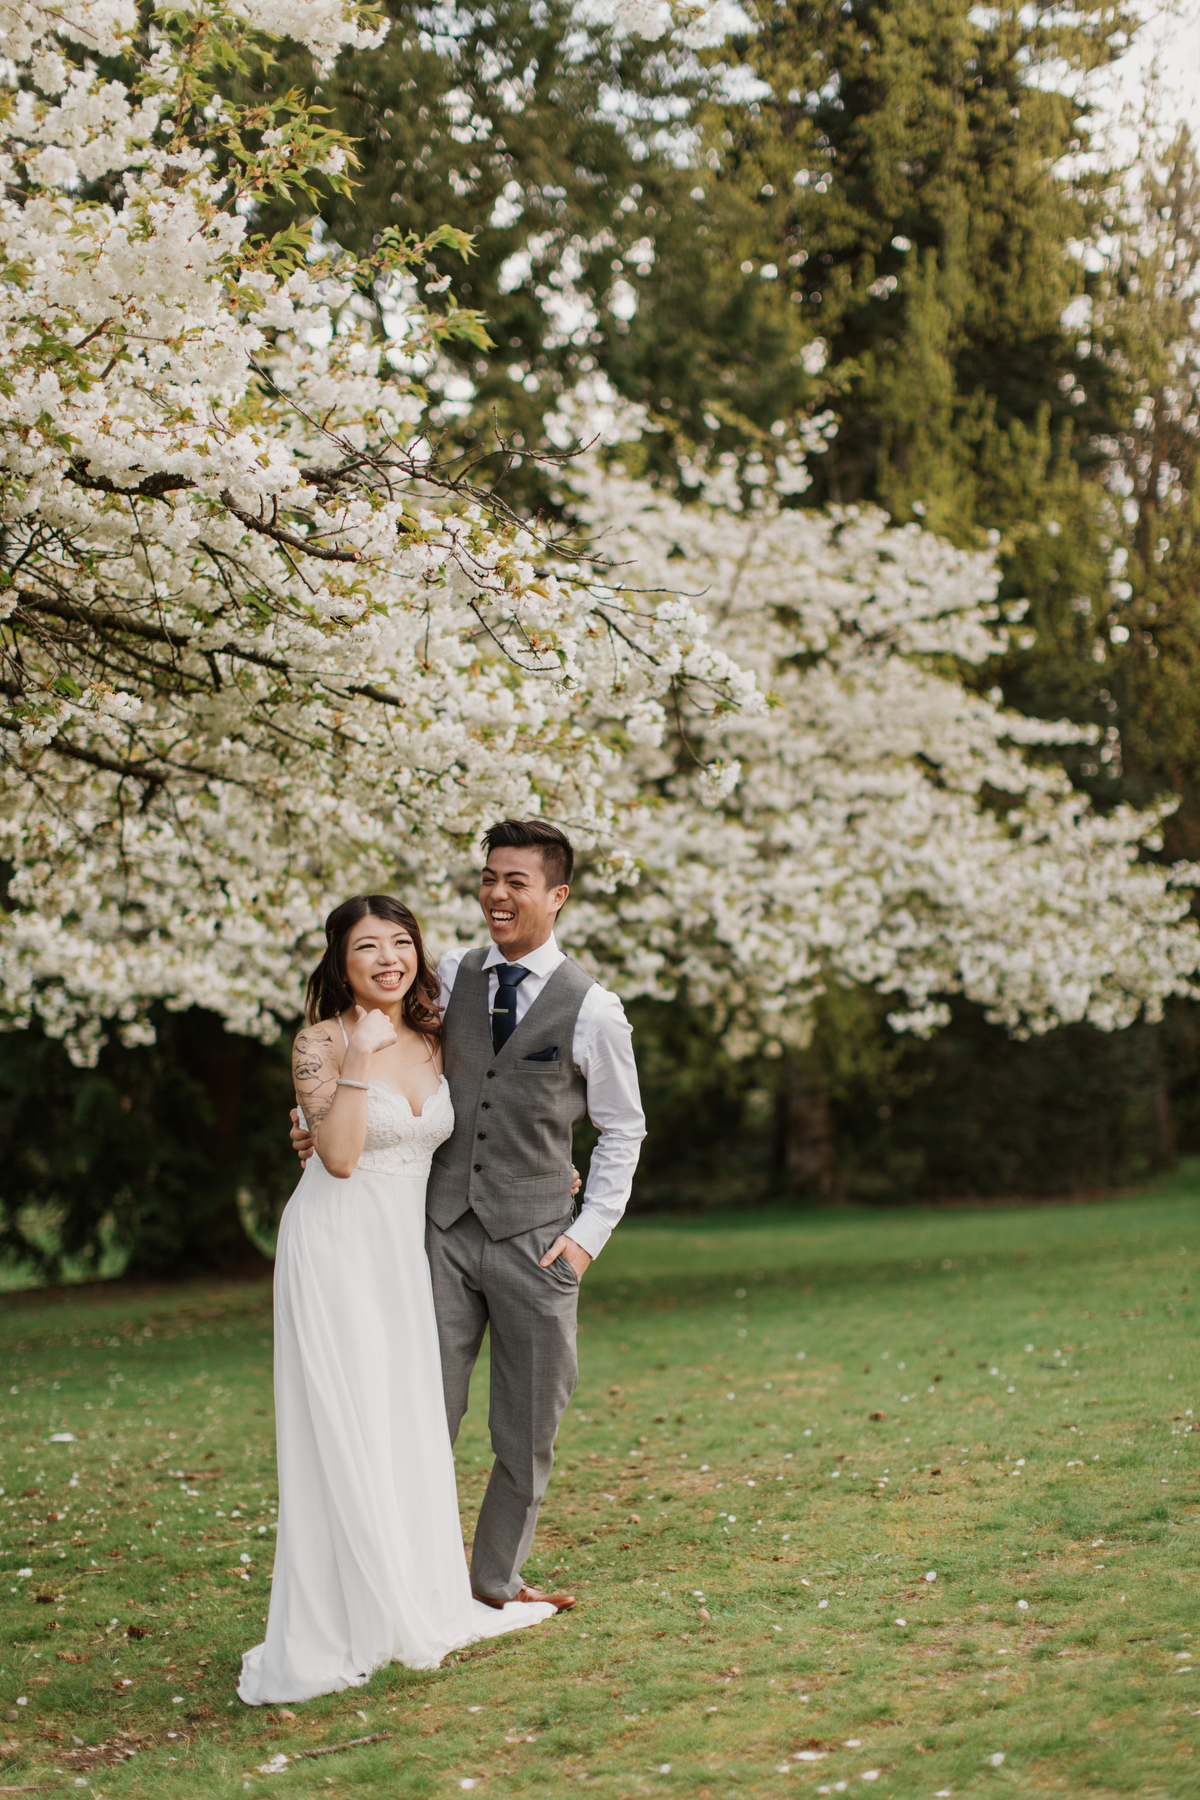 Vancouver Blossom Engagement Photos by Jamie Delaine